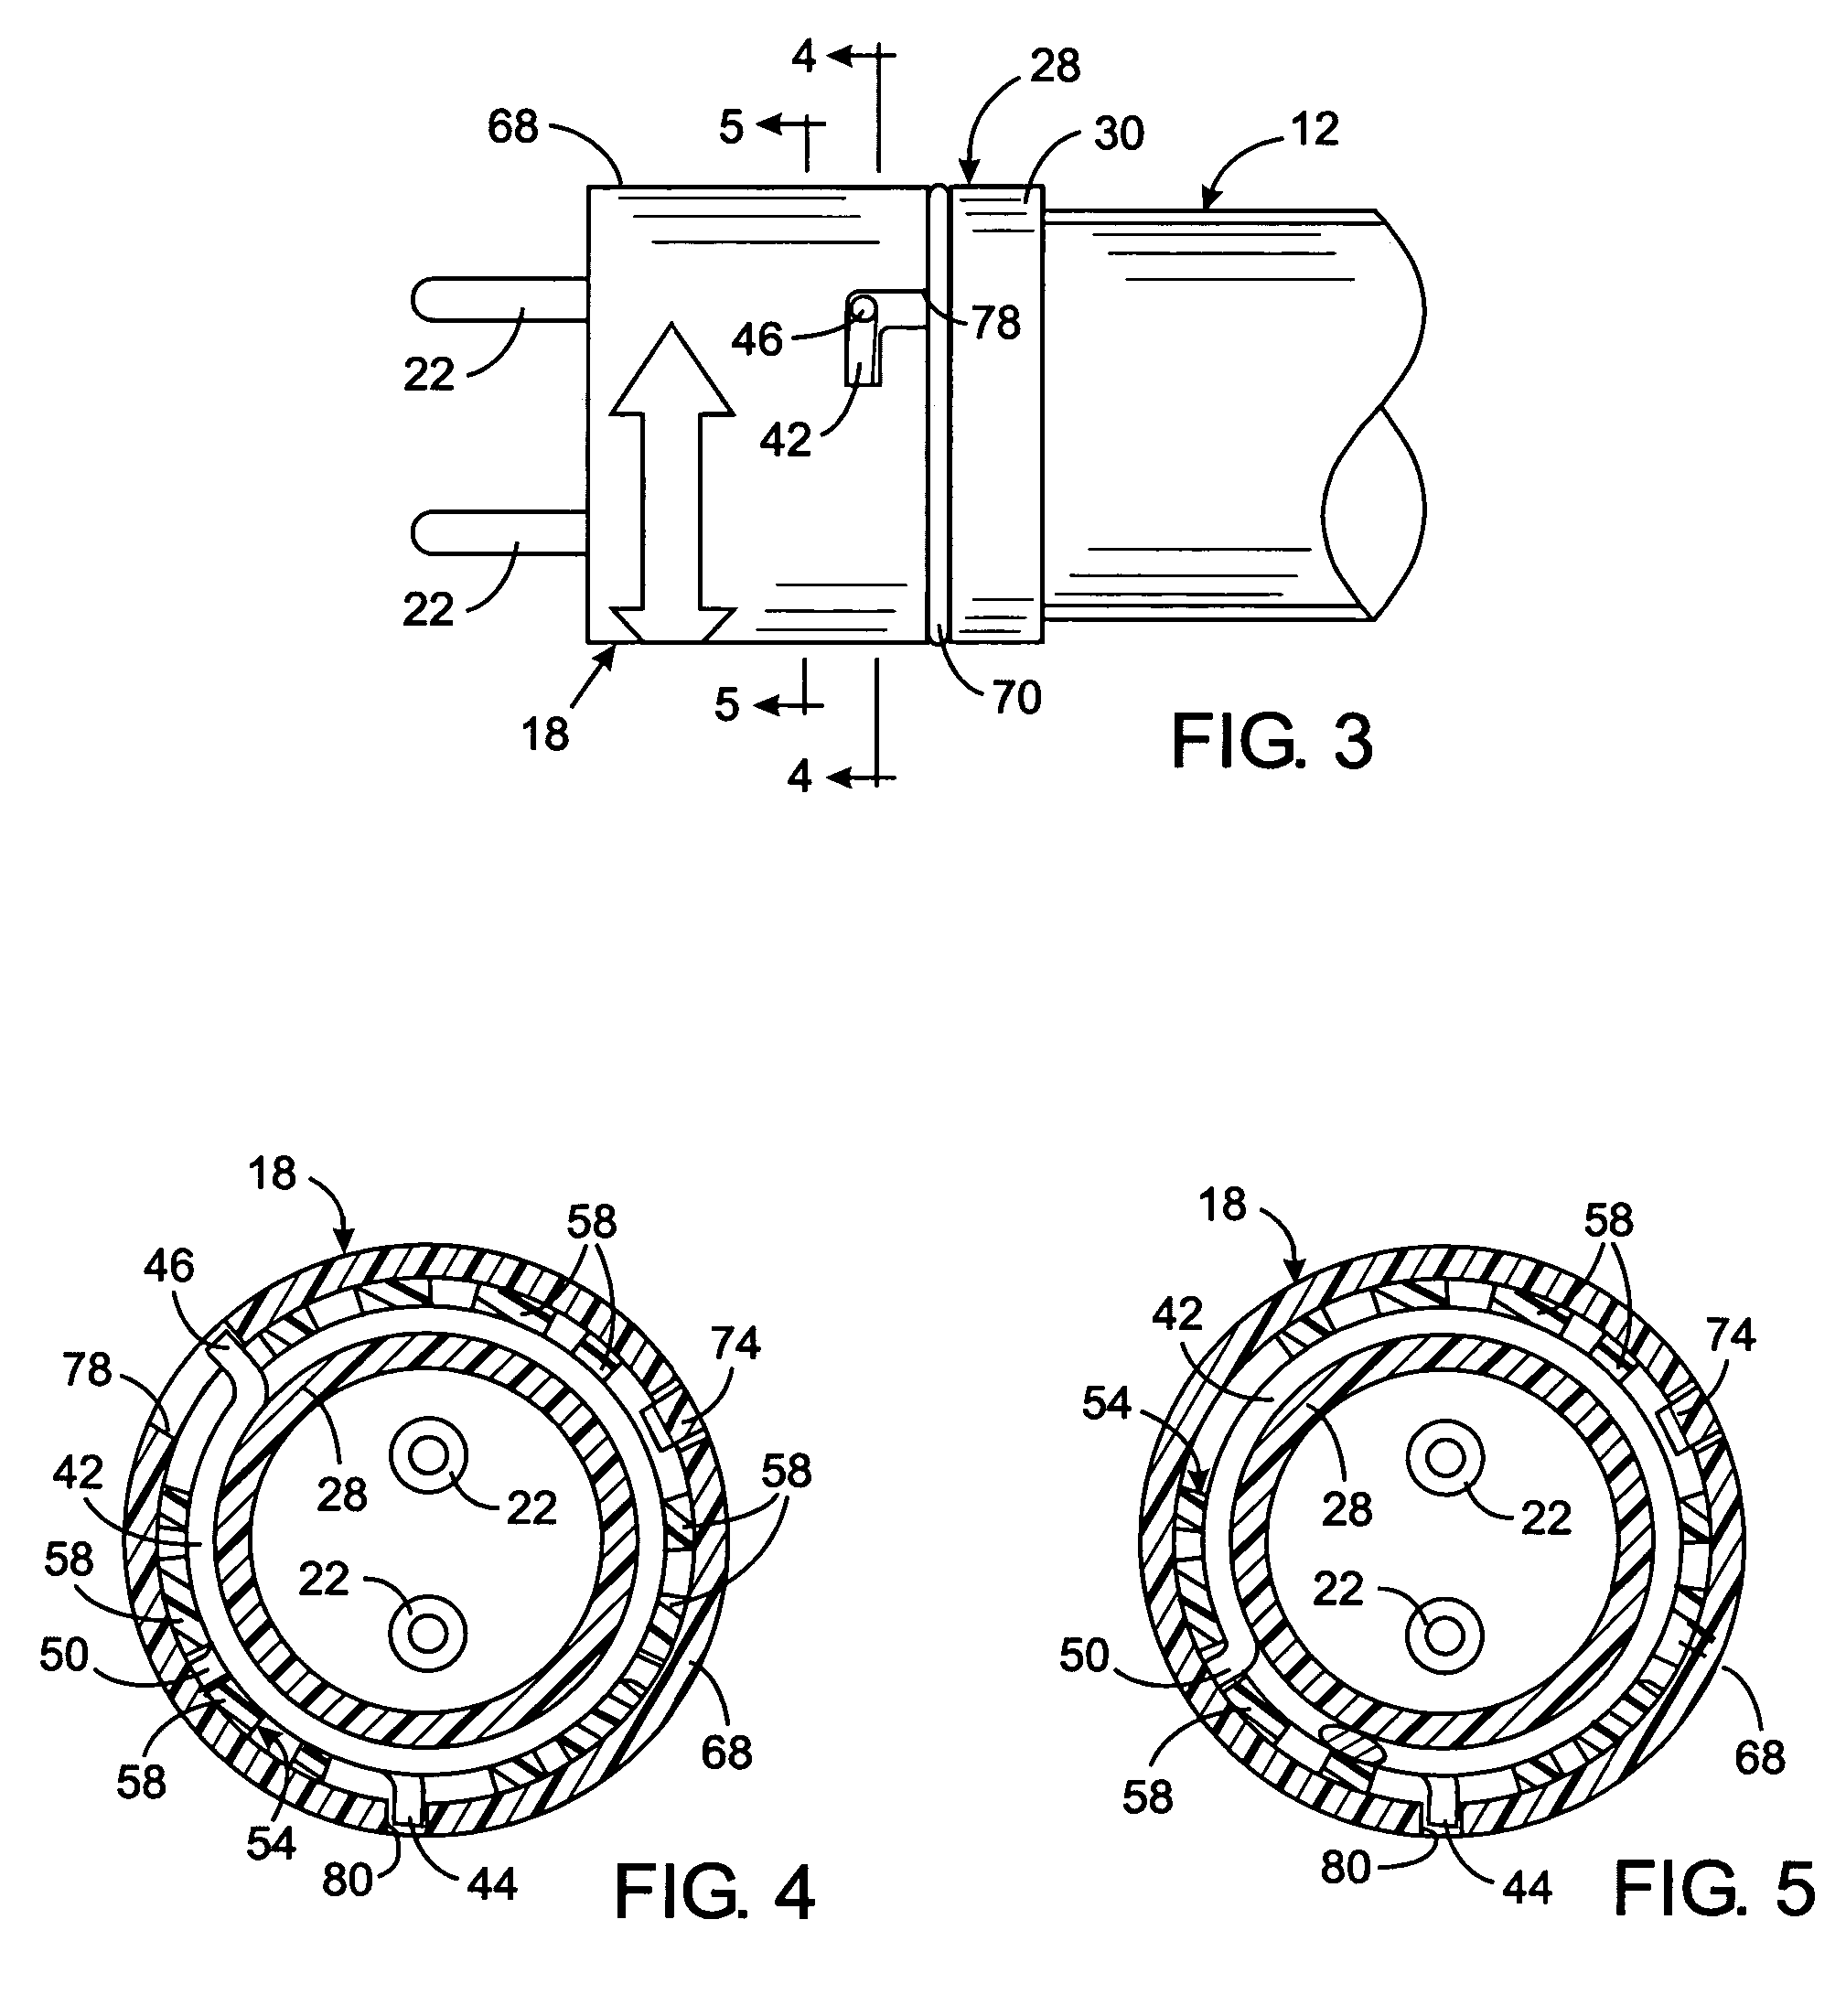 Lighting assembly with swivel end connectors